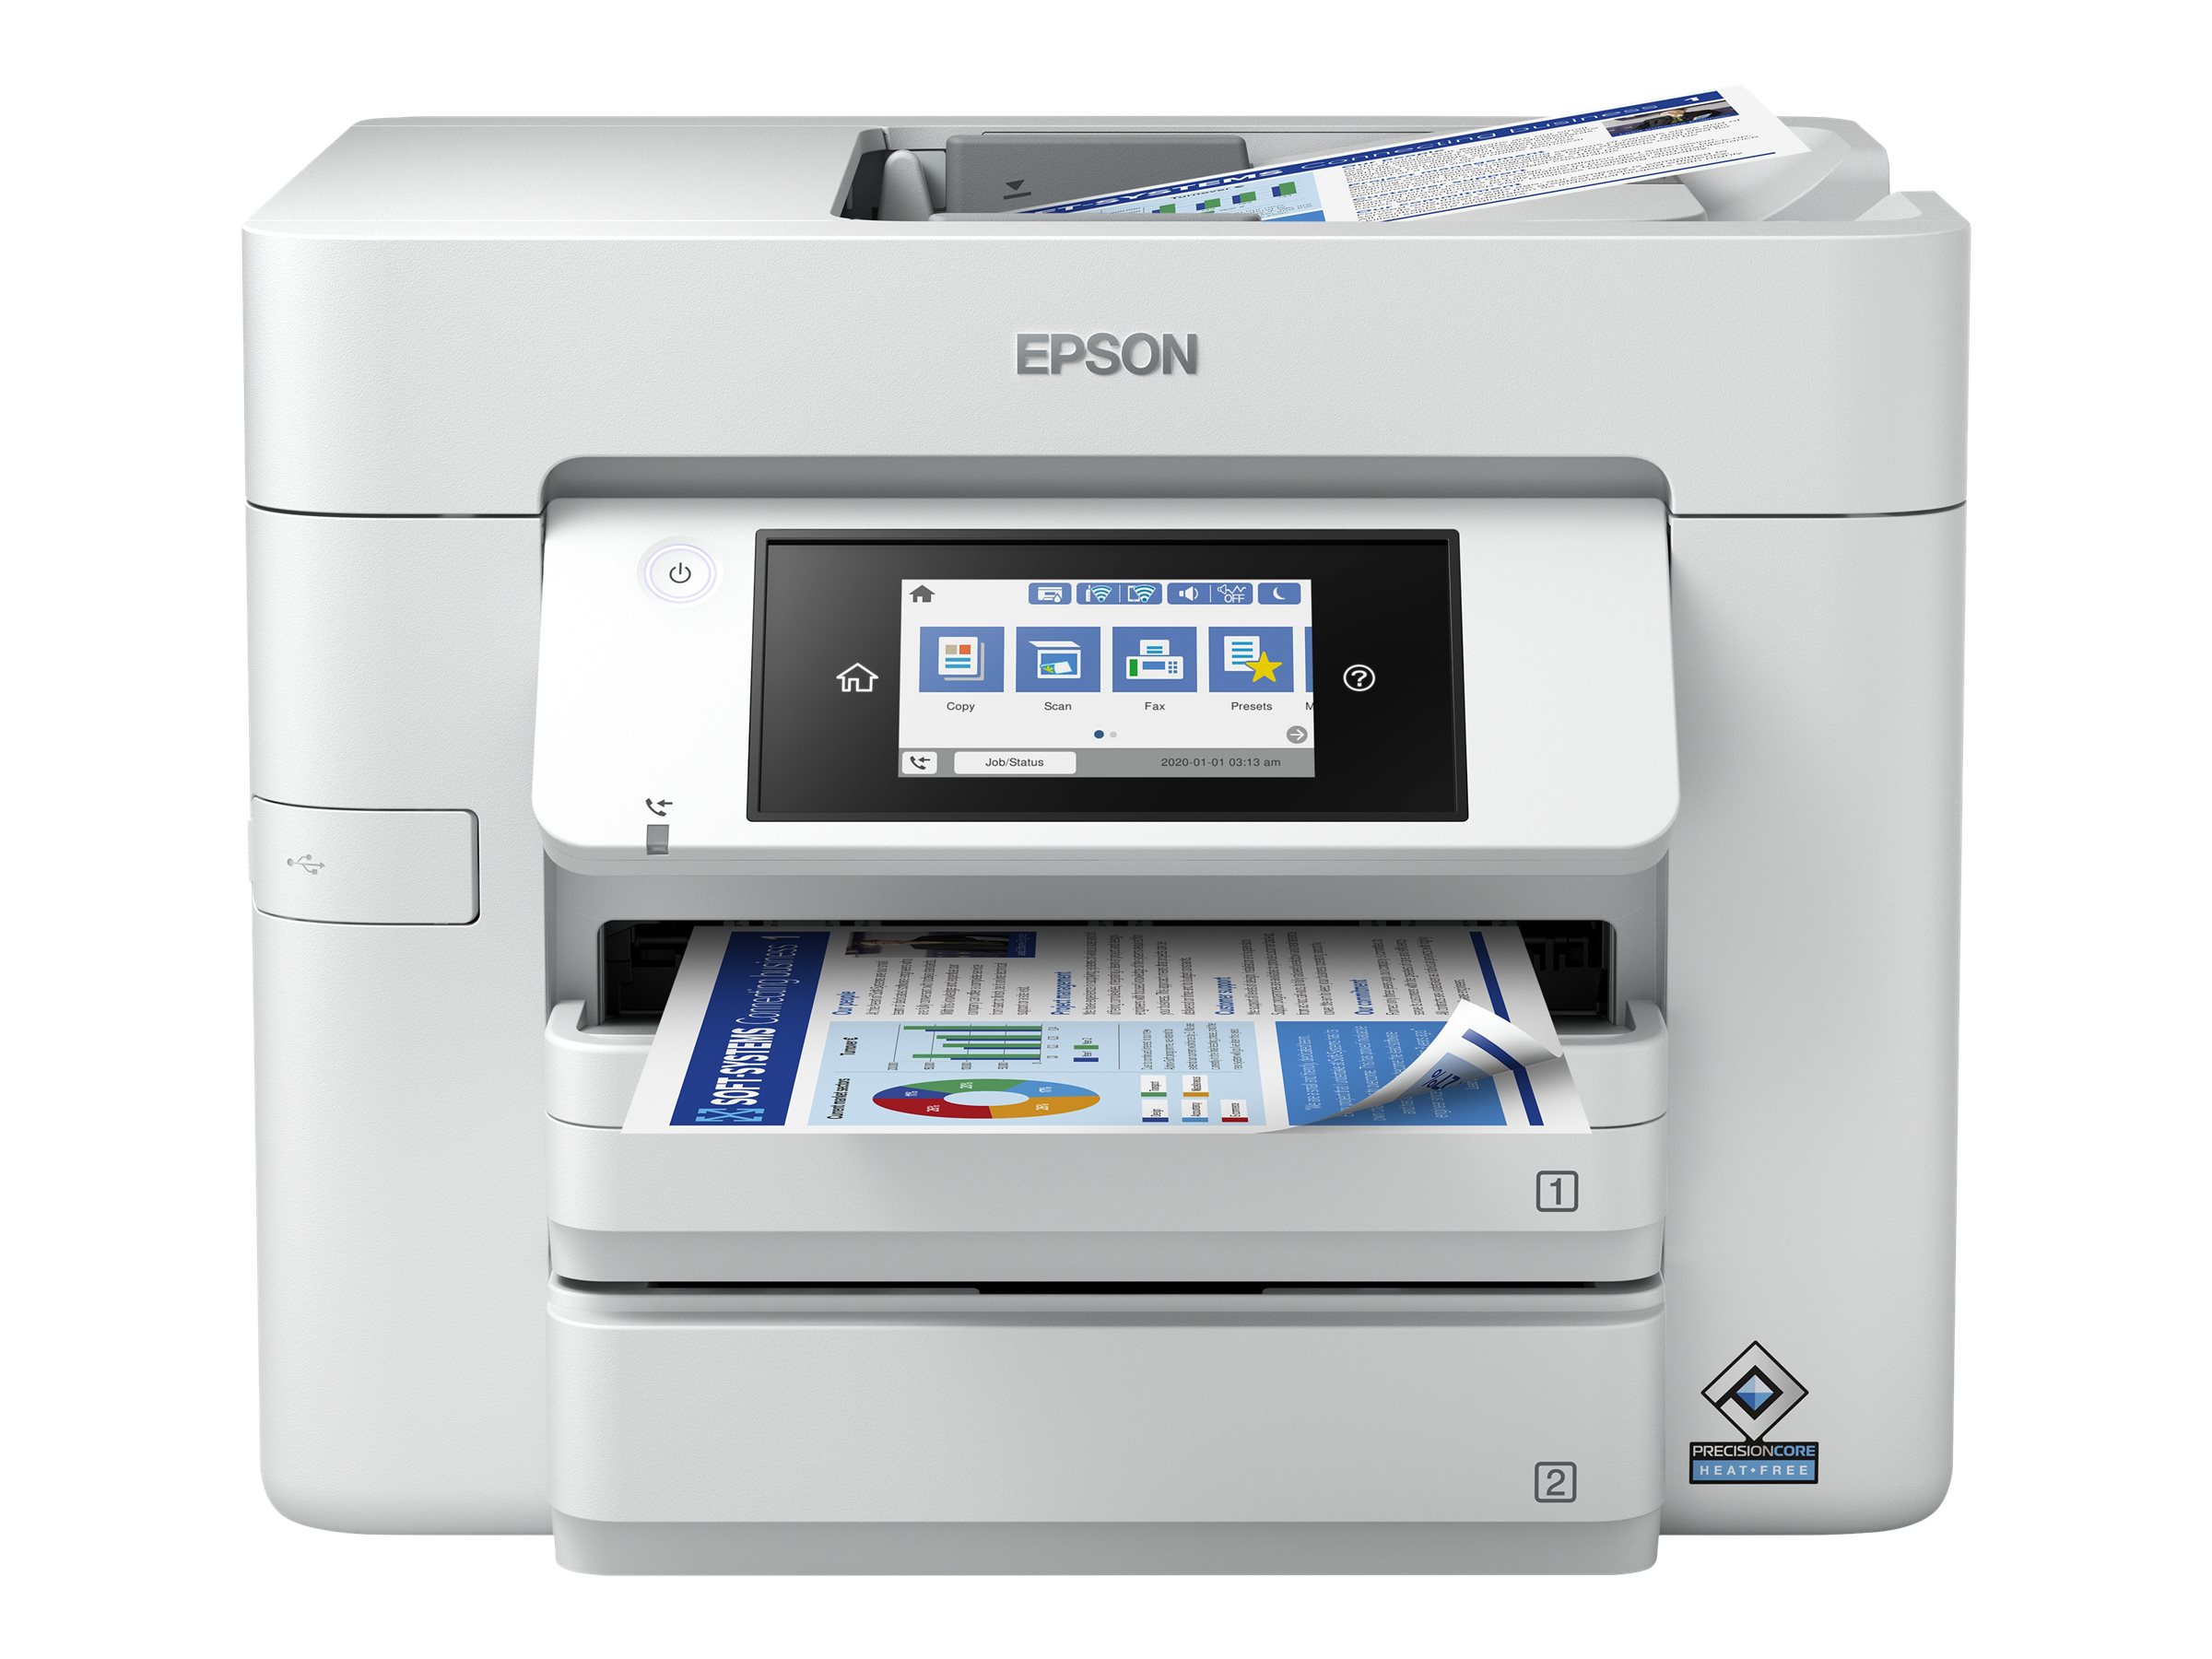 Tips for Printing Transparencies with Epson Inkjet Printers